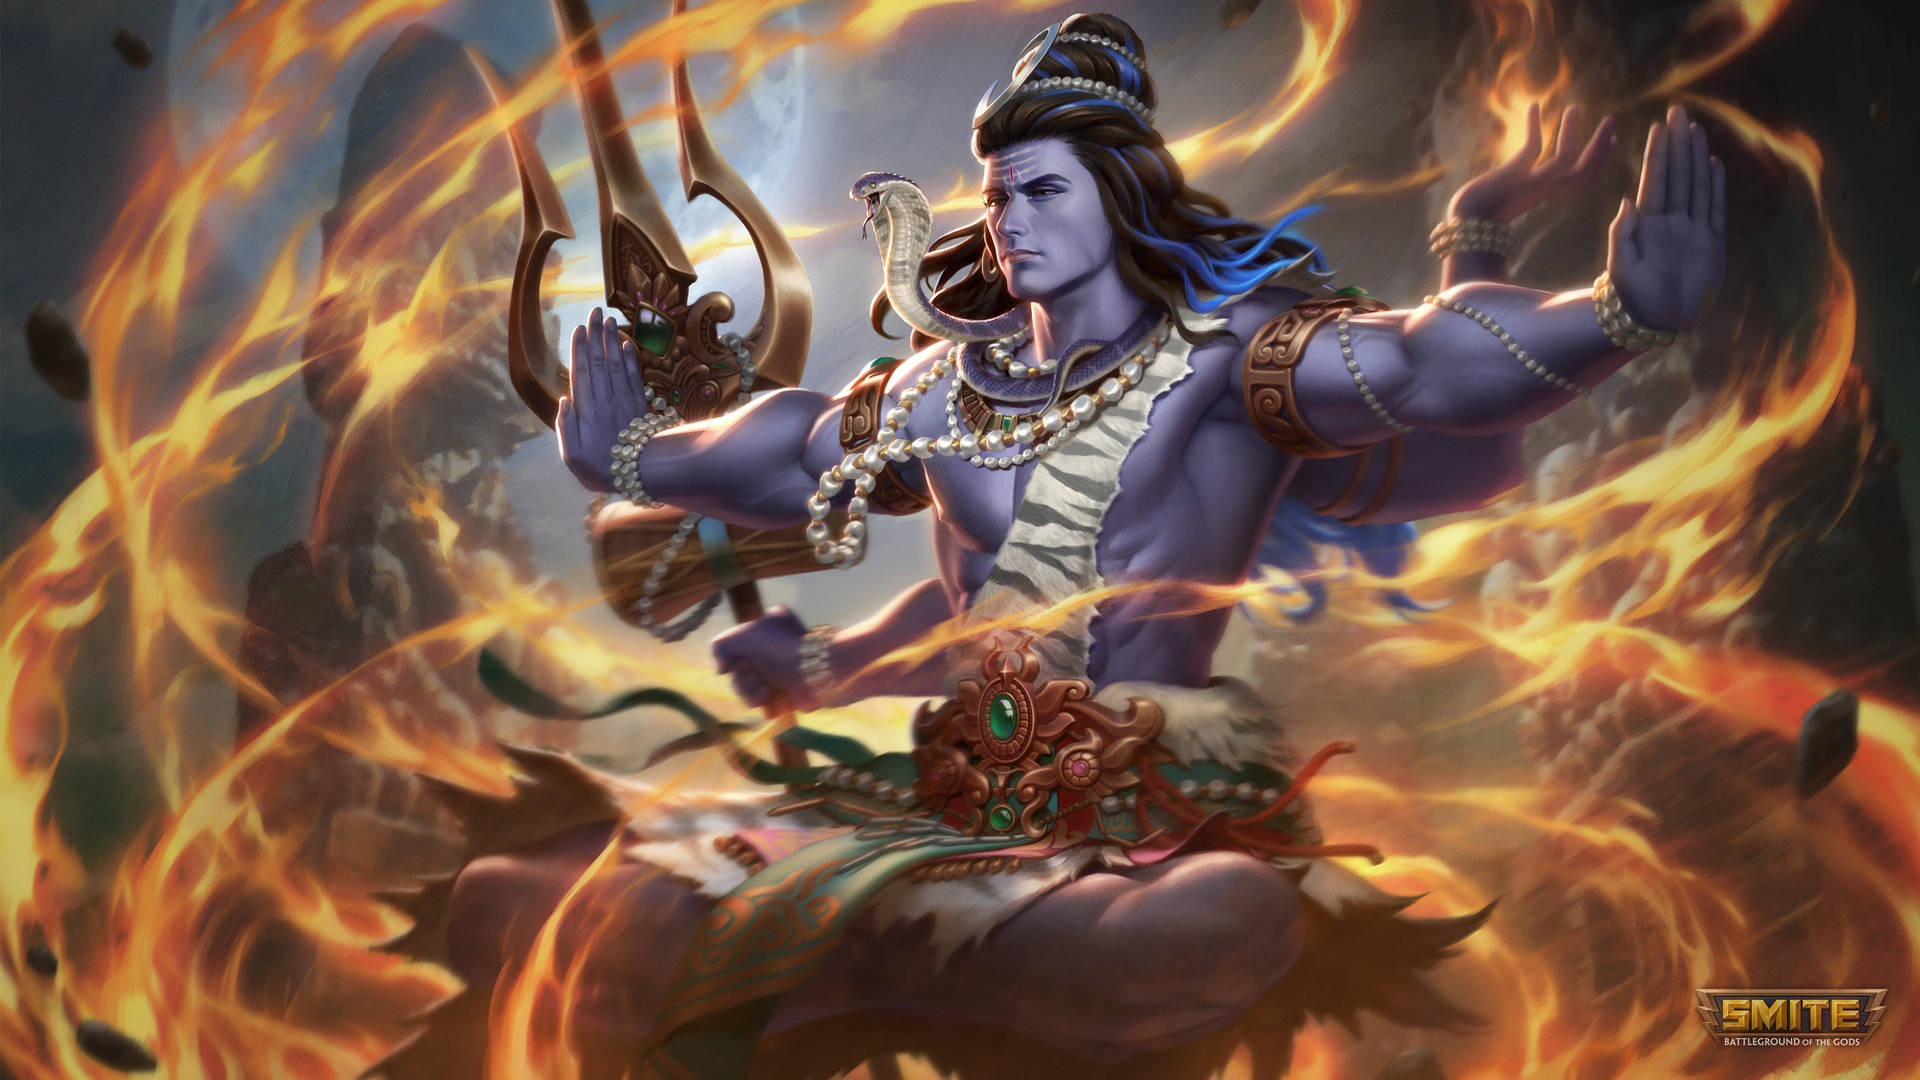 Free Lord Shiva 8k Wallpaper Downloads, [100+] Lord Shiva 8k Wallpapers for  FREE 